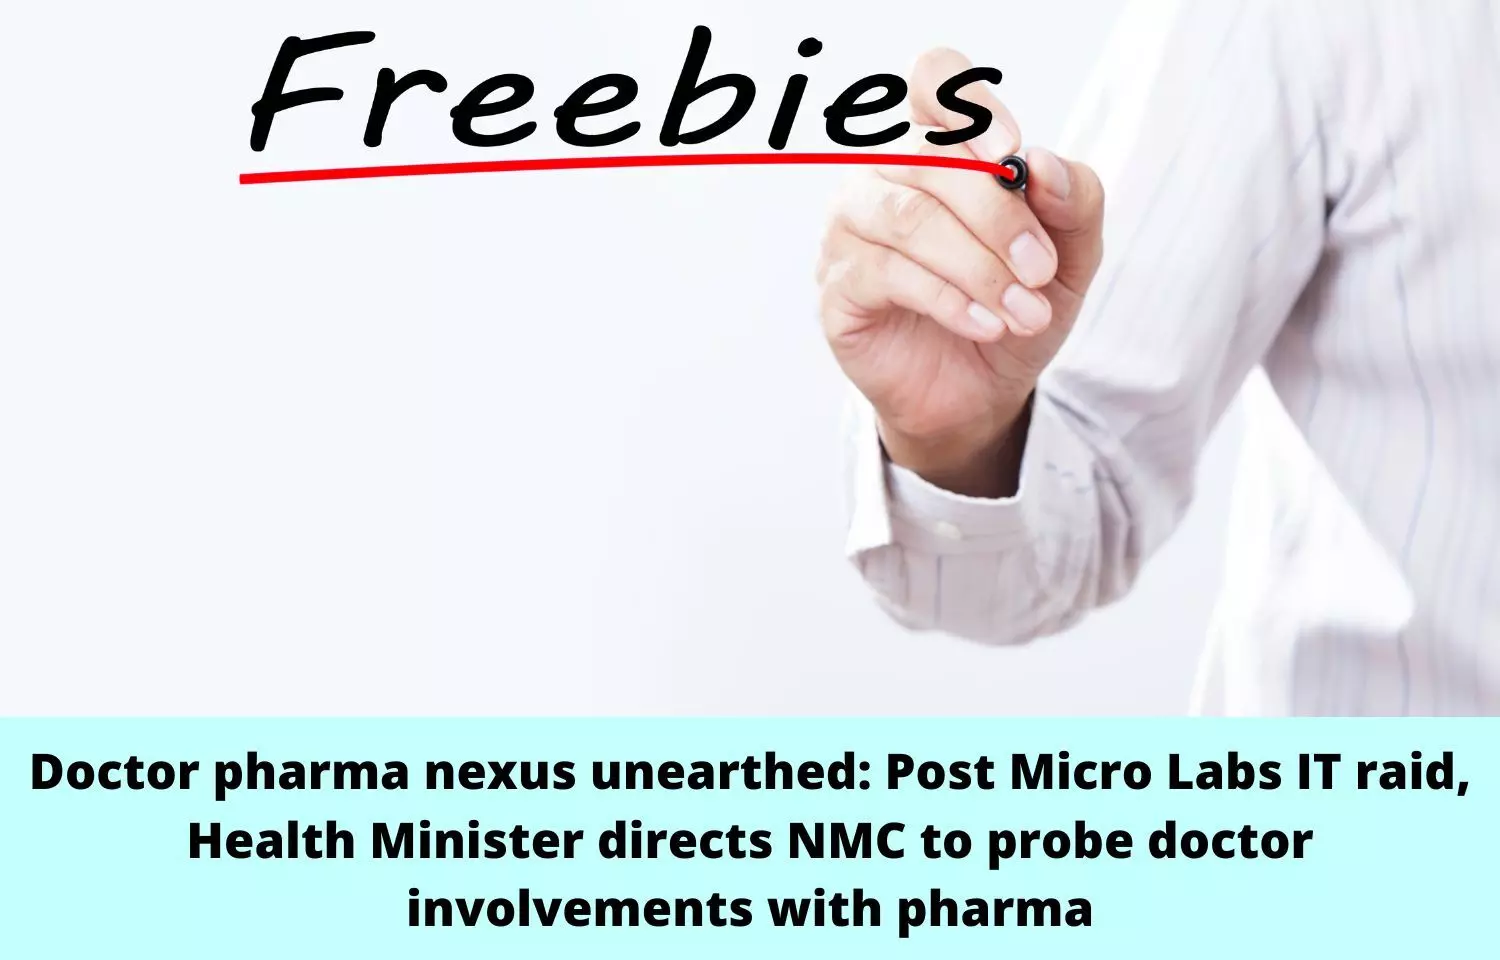 Post Micro Labs IT raid, Health Minister directs NMC to probe doctor involvements with pharma